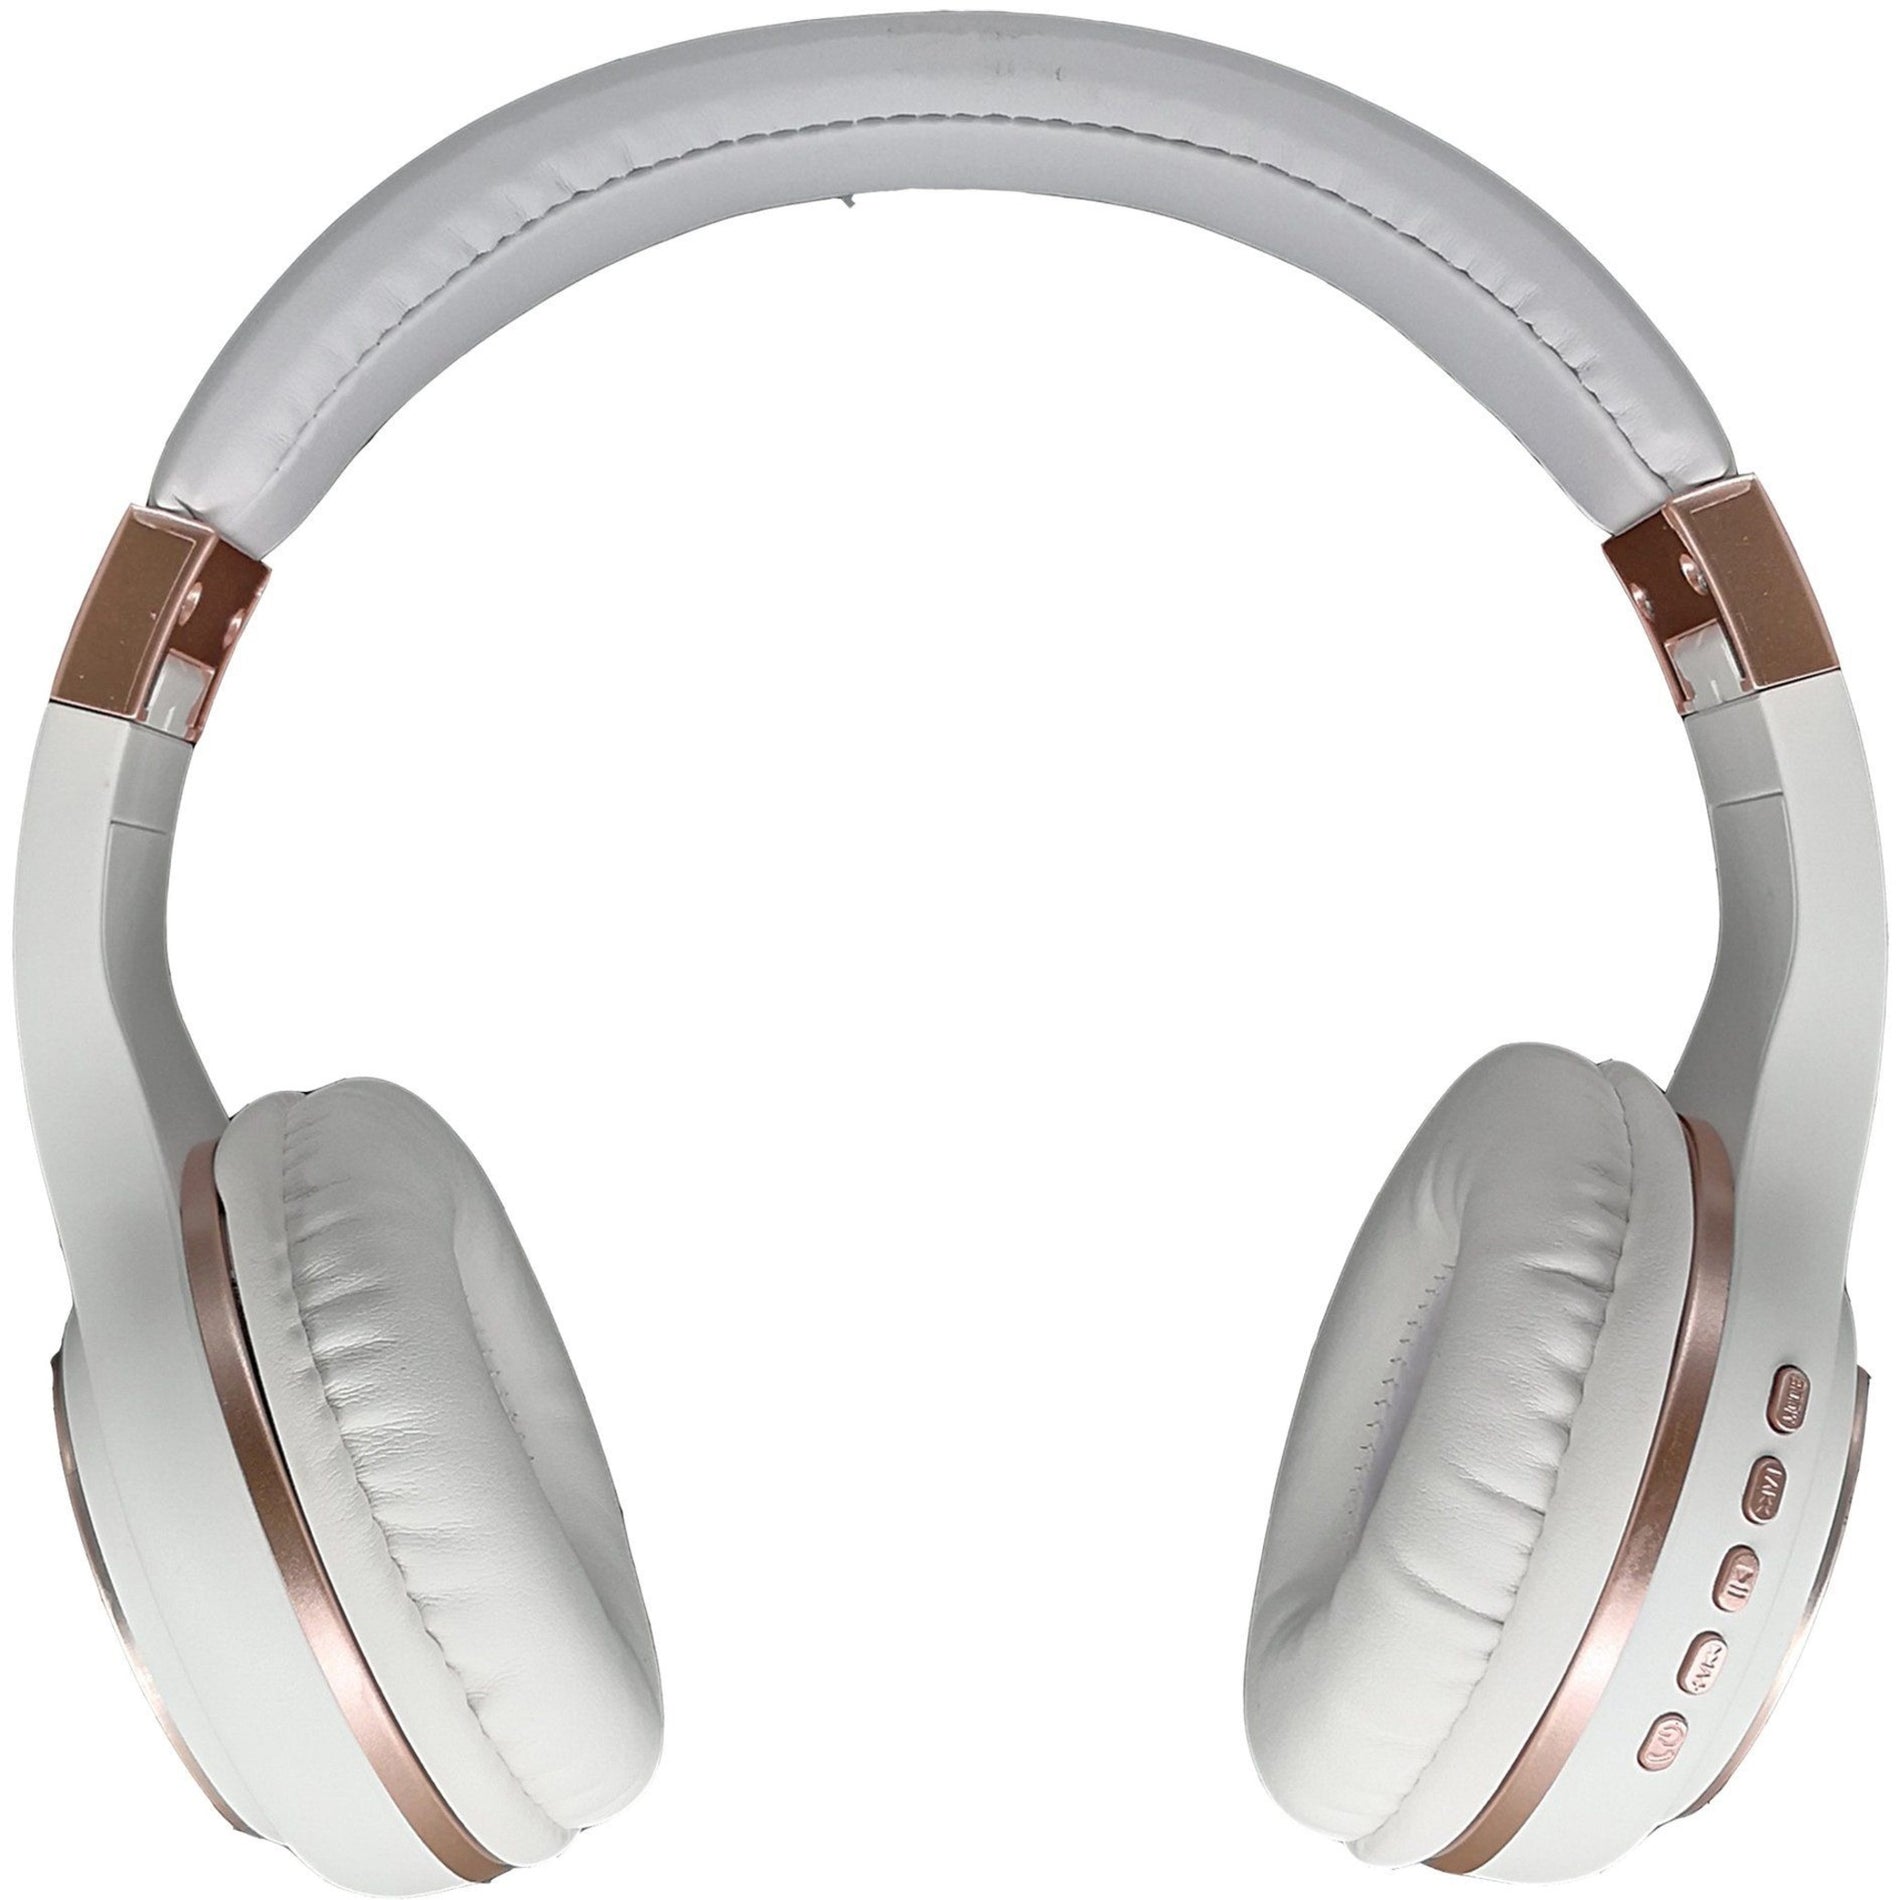 Morpheus 360 HP5500R Wireless Stereo Bluetooth Headphones, Built-in Microphone, White/Rose Gold